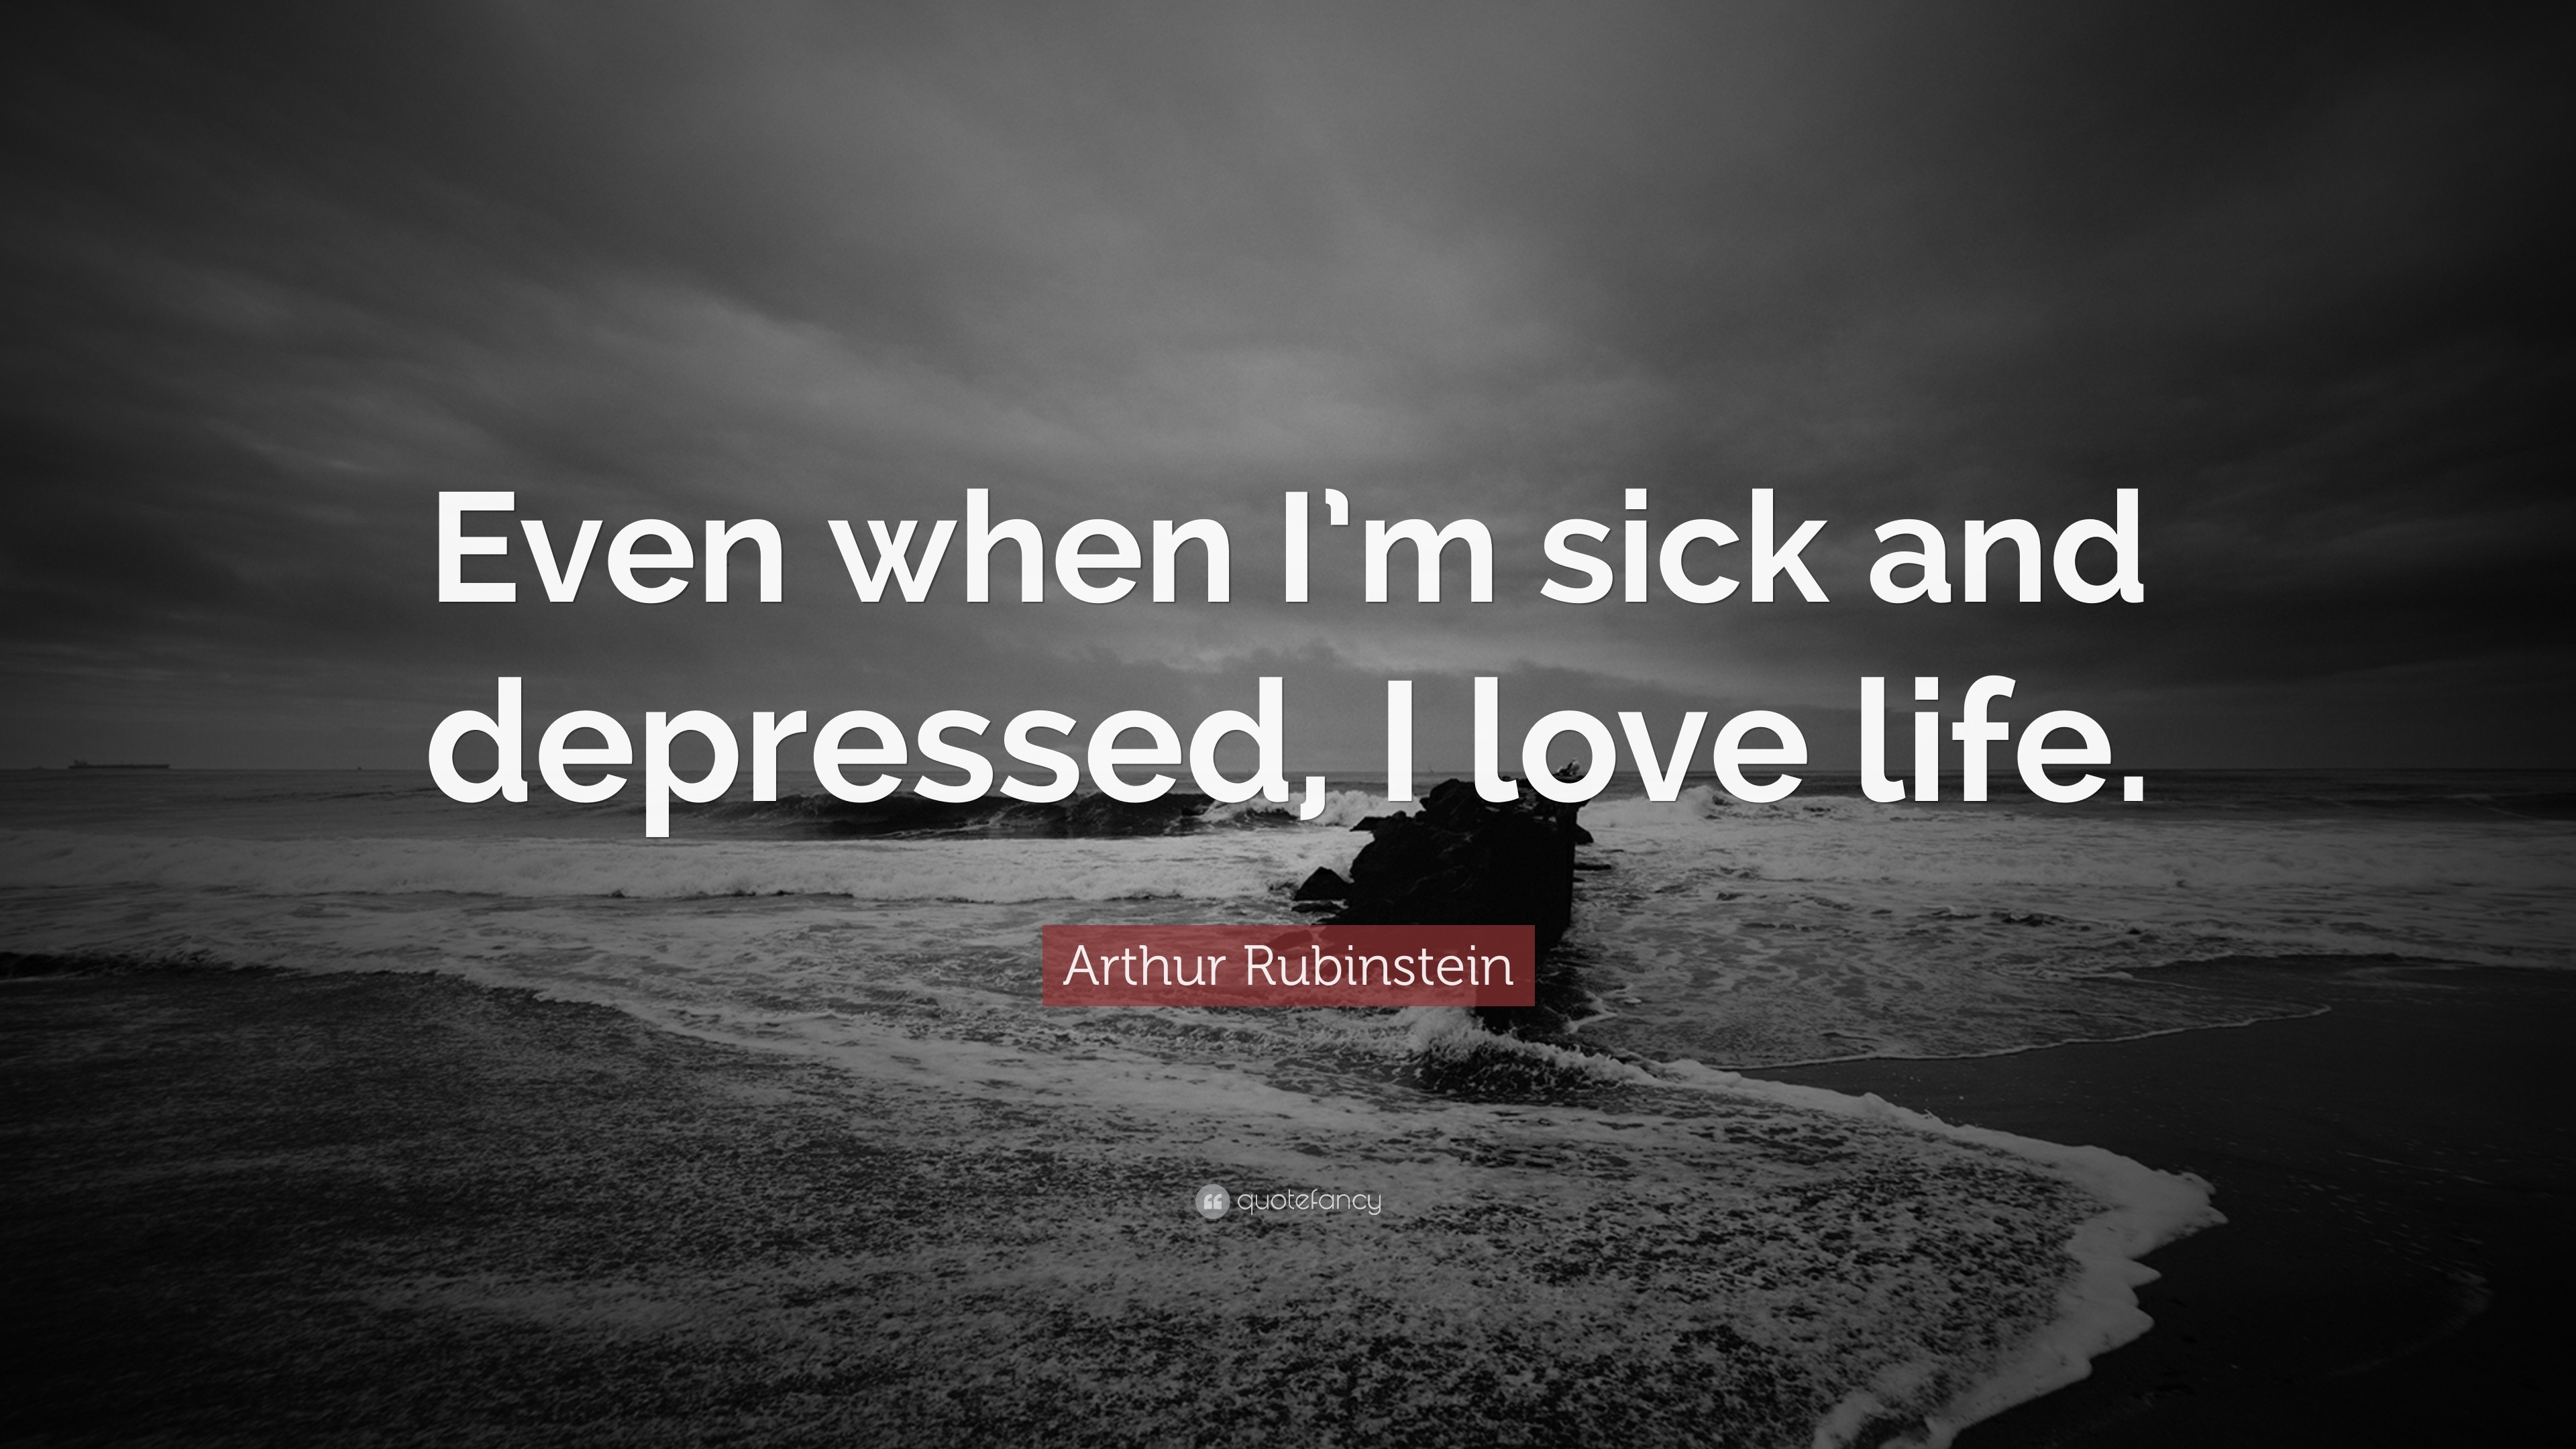 3840x2160 Arthur Rubinstein Quote: “Even when I'm sick and depressed, I love